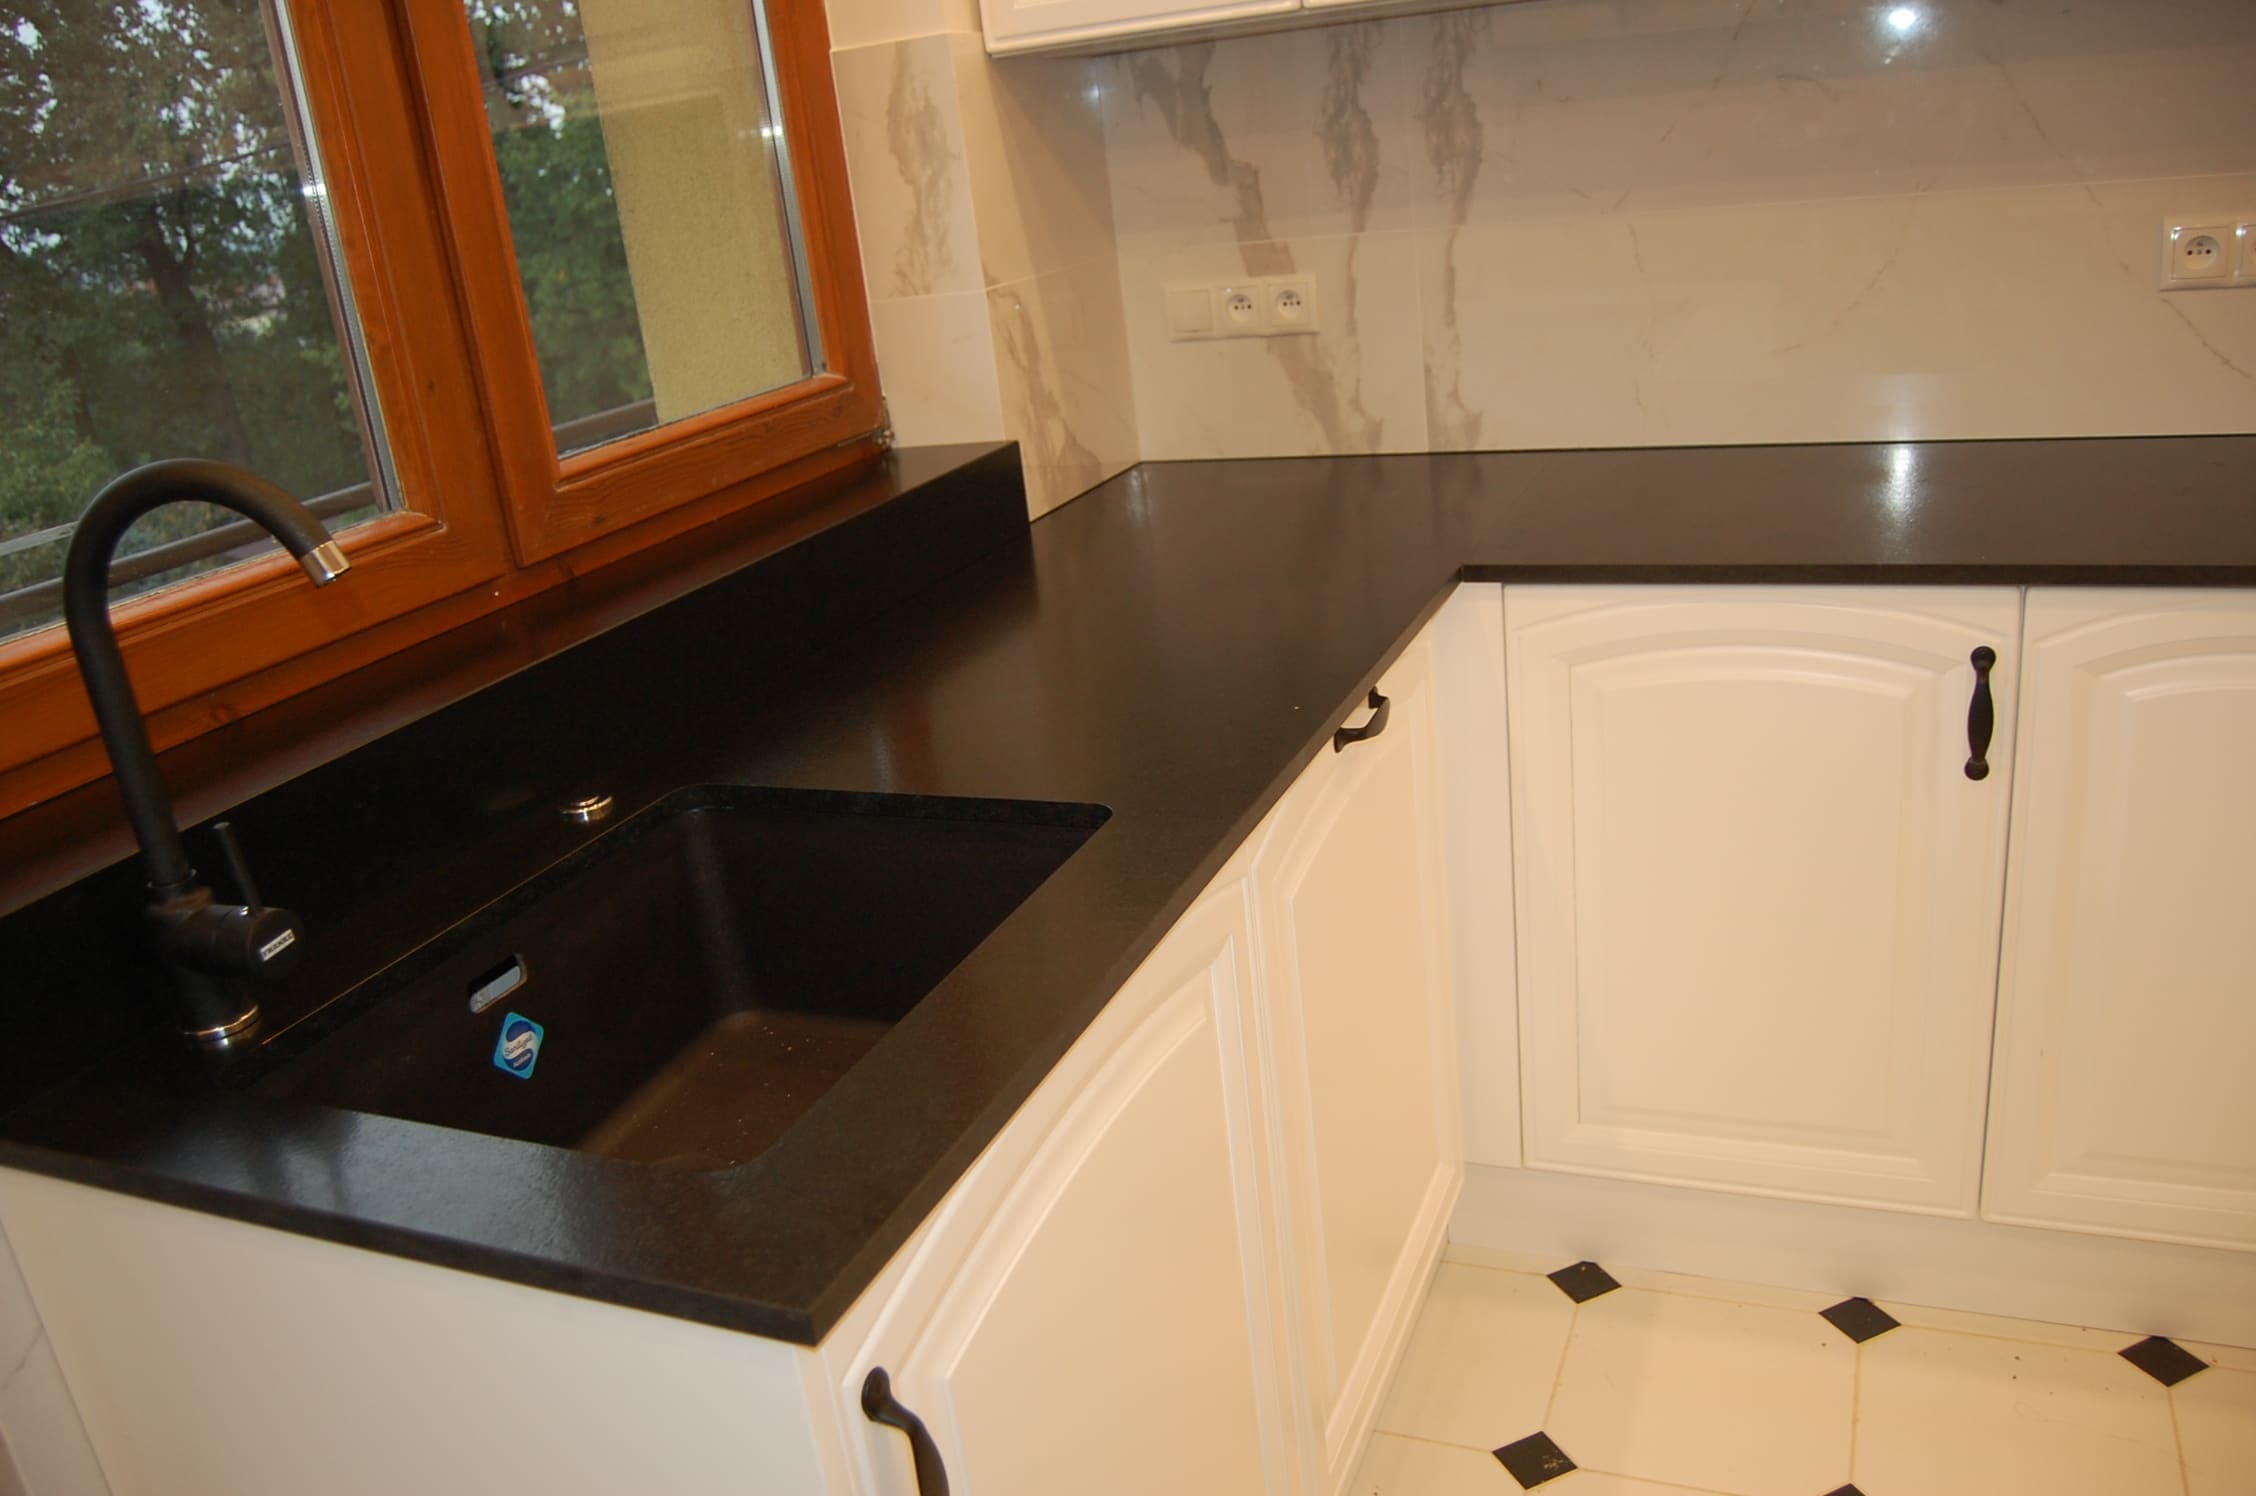 What to pay attention to when buying a kitchen worktop? – Fainner